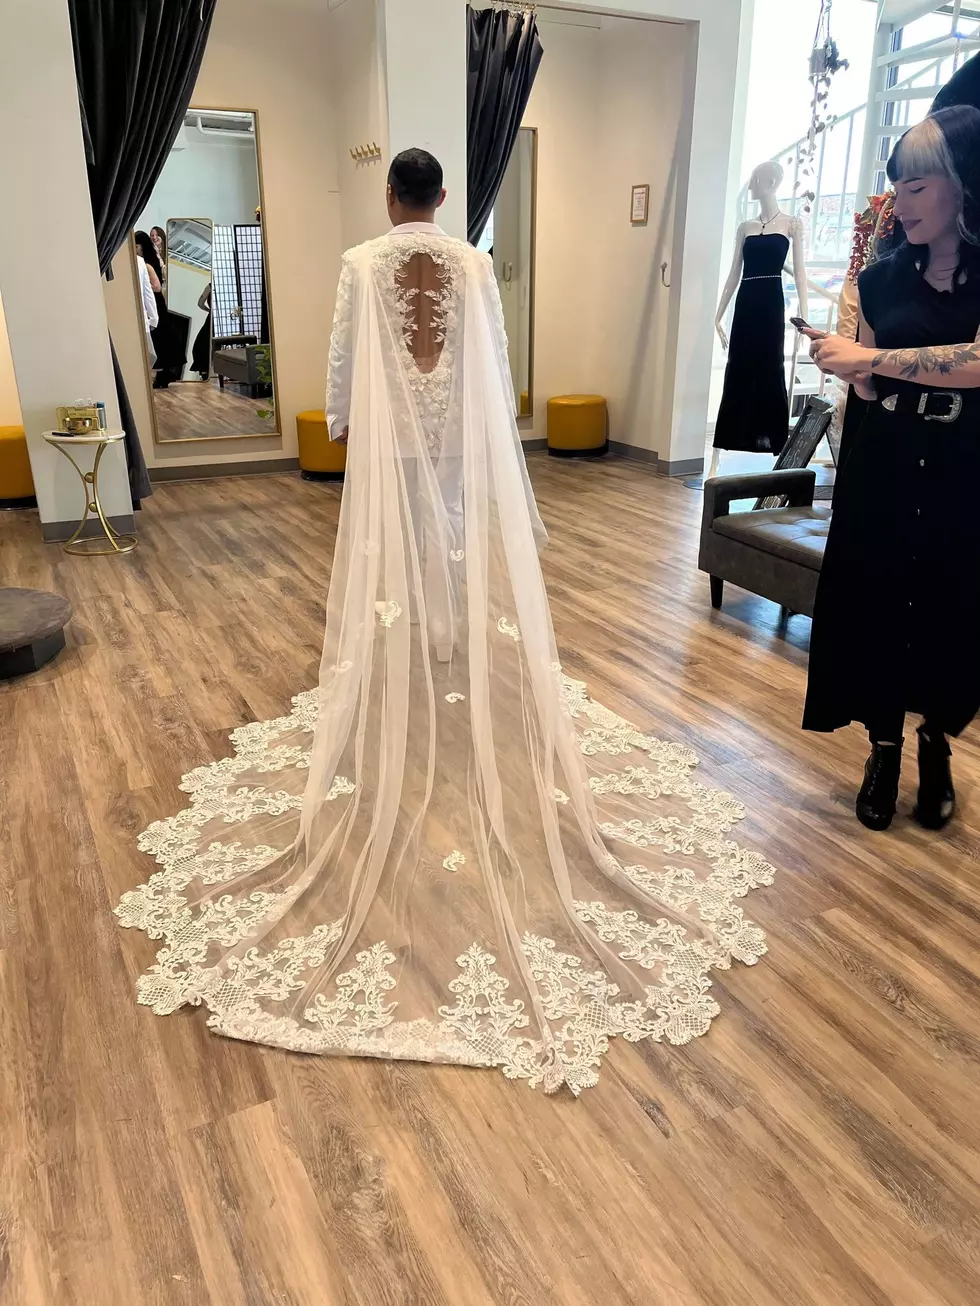 Illinois Groom Goes Viral for Incredible Veiled Suit